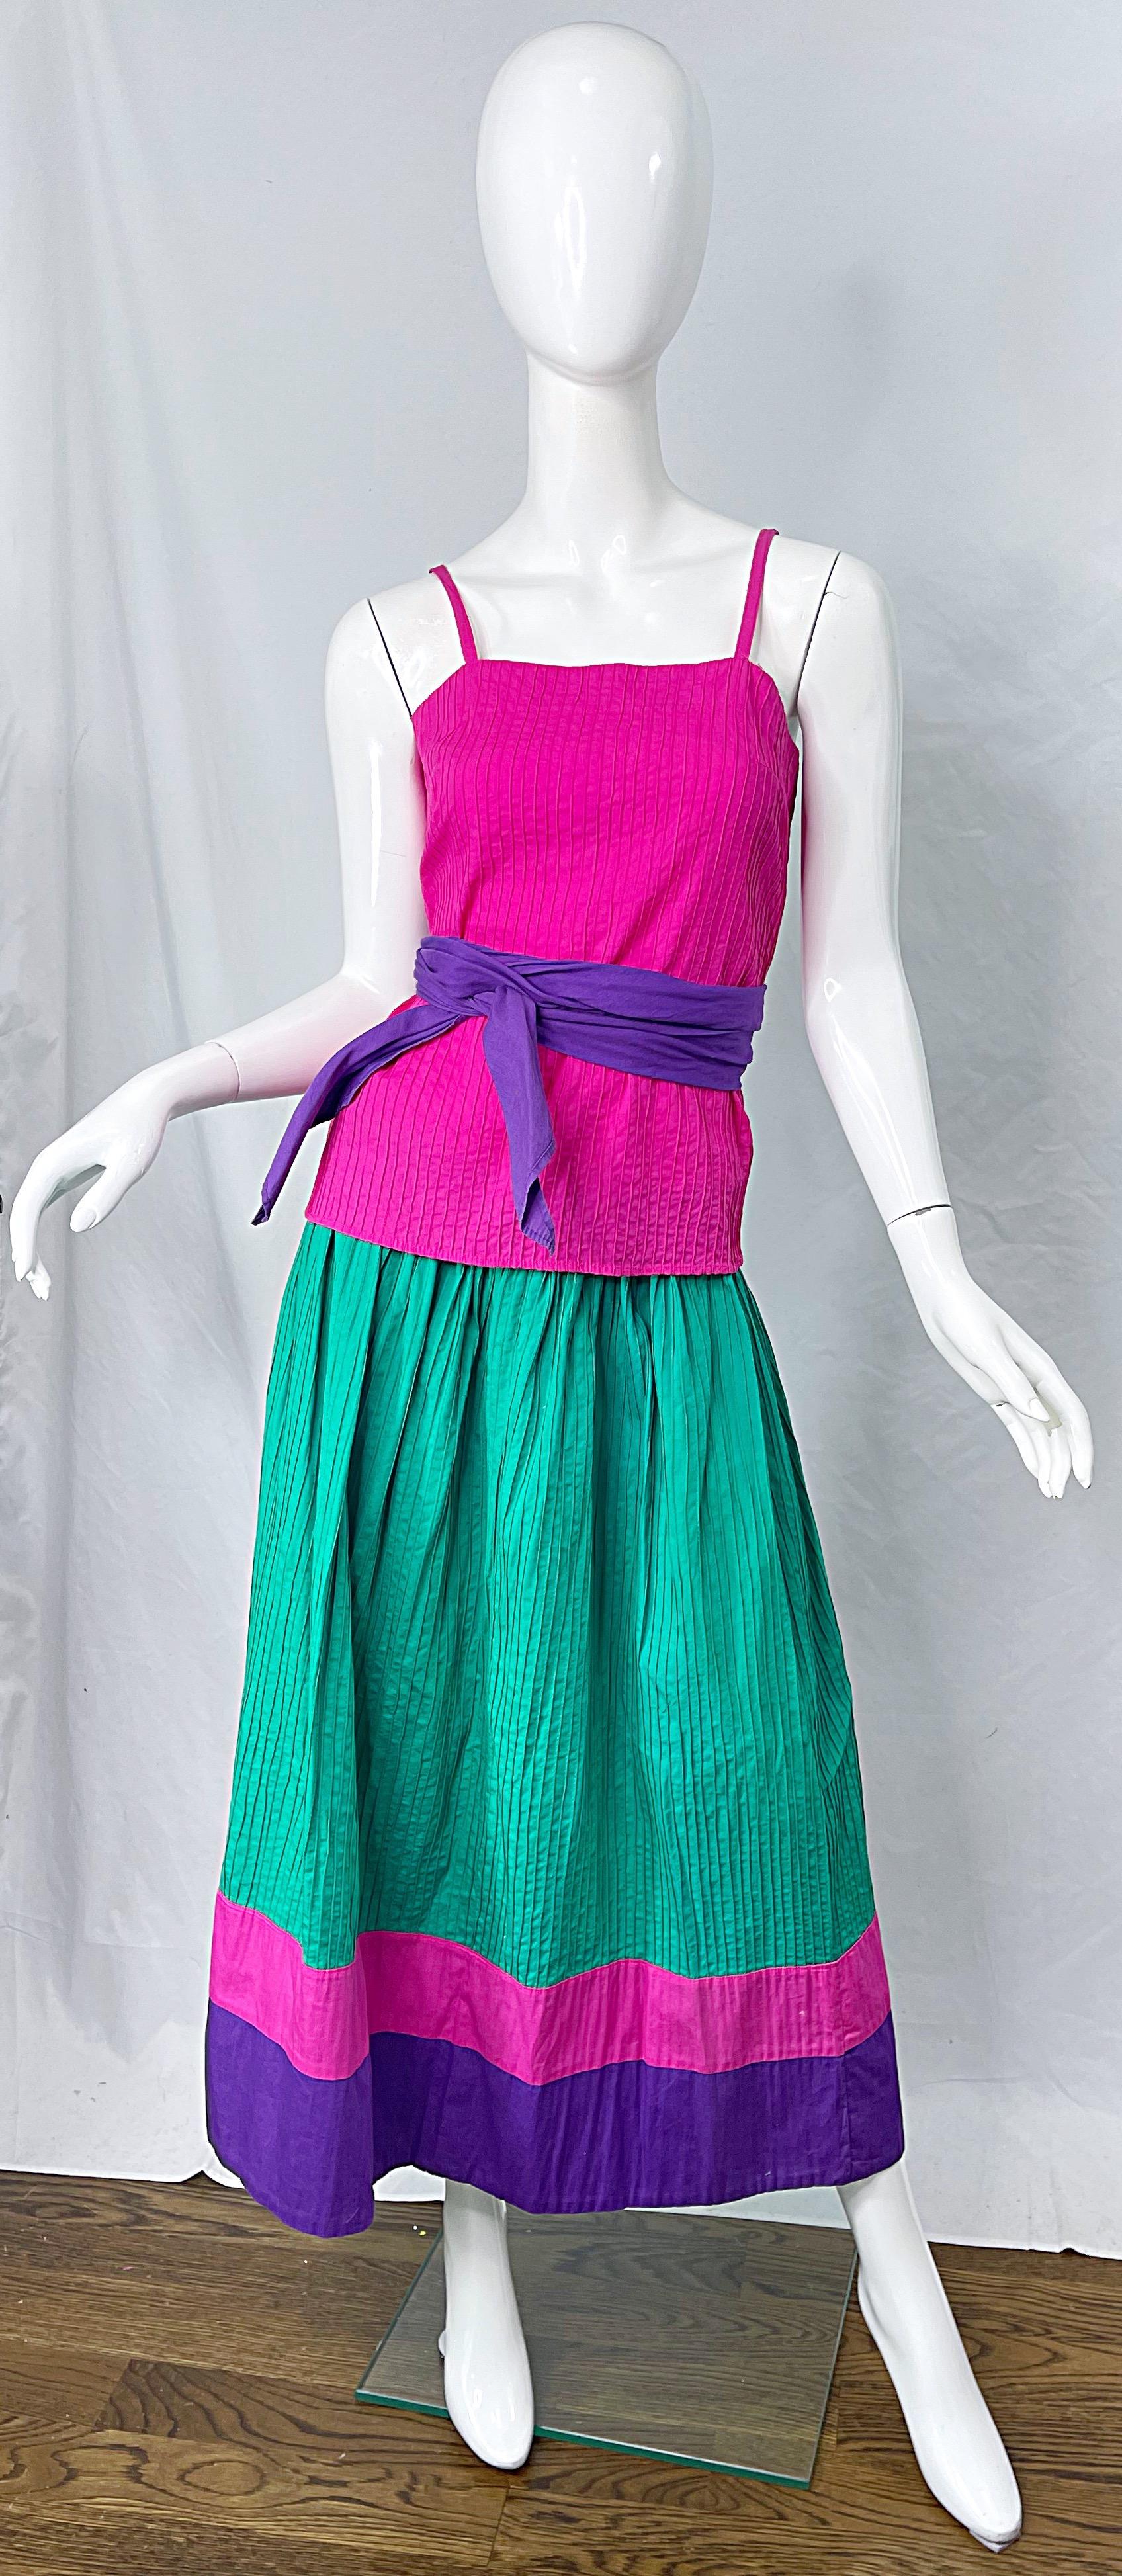 Chic late 70s TACHI CASTILLO 4 piece cotton dress ensemble ! 
Set includes:
-Hot pink sleeveless tank top with buttons up the back
-Green blouse with purple under the sleeves
-Purple obi sash belt
-Green skirt with elastic waistband 
All four pieces